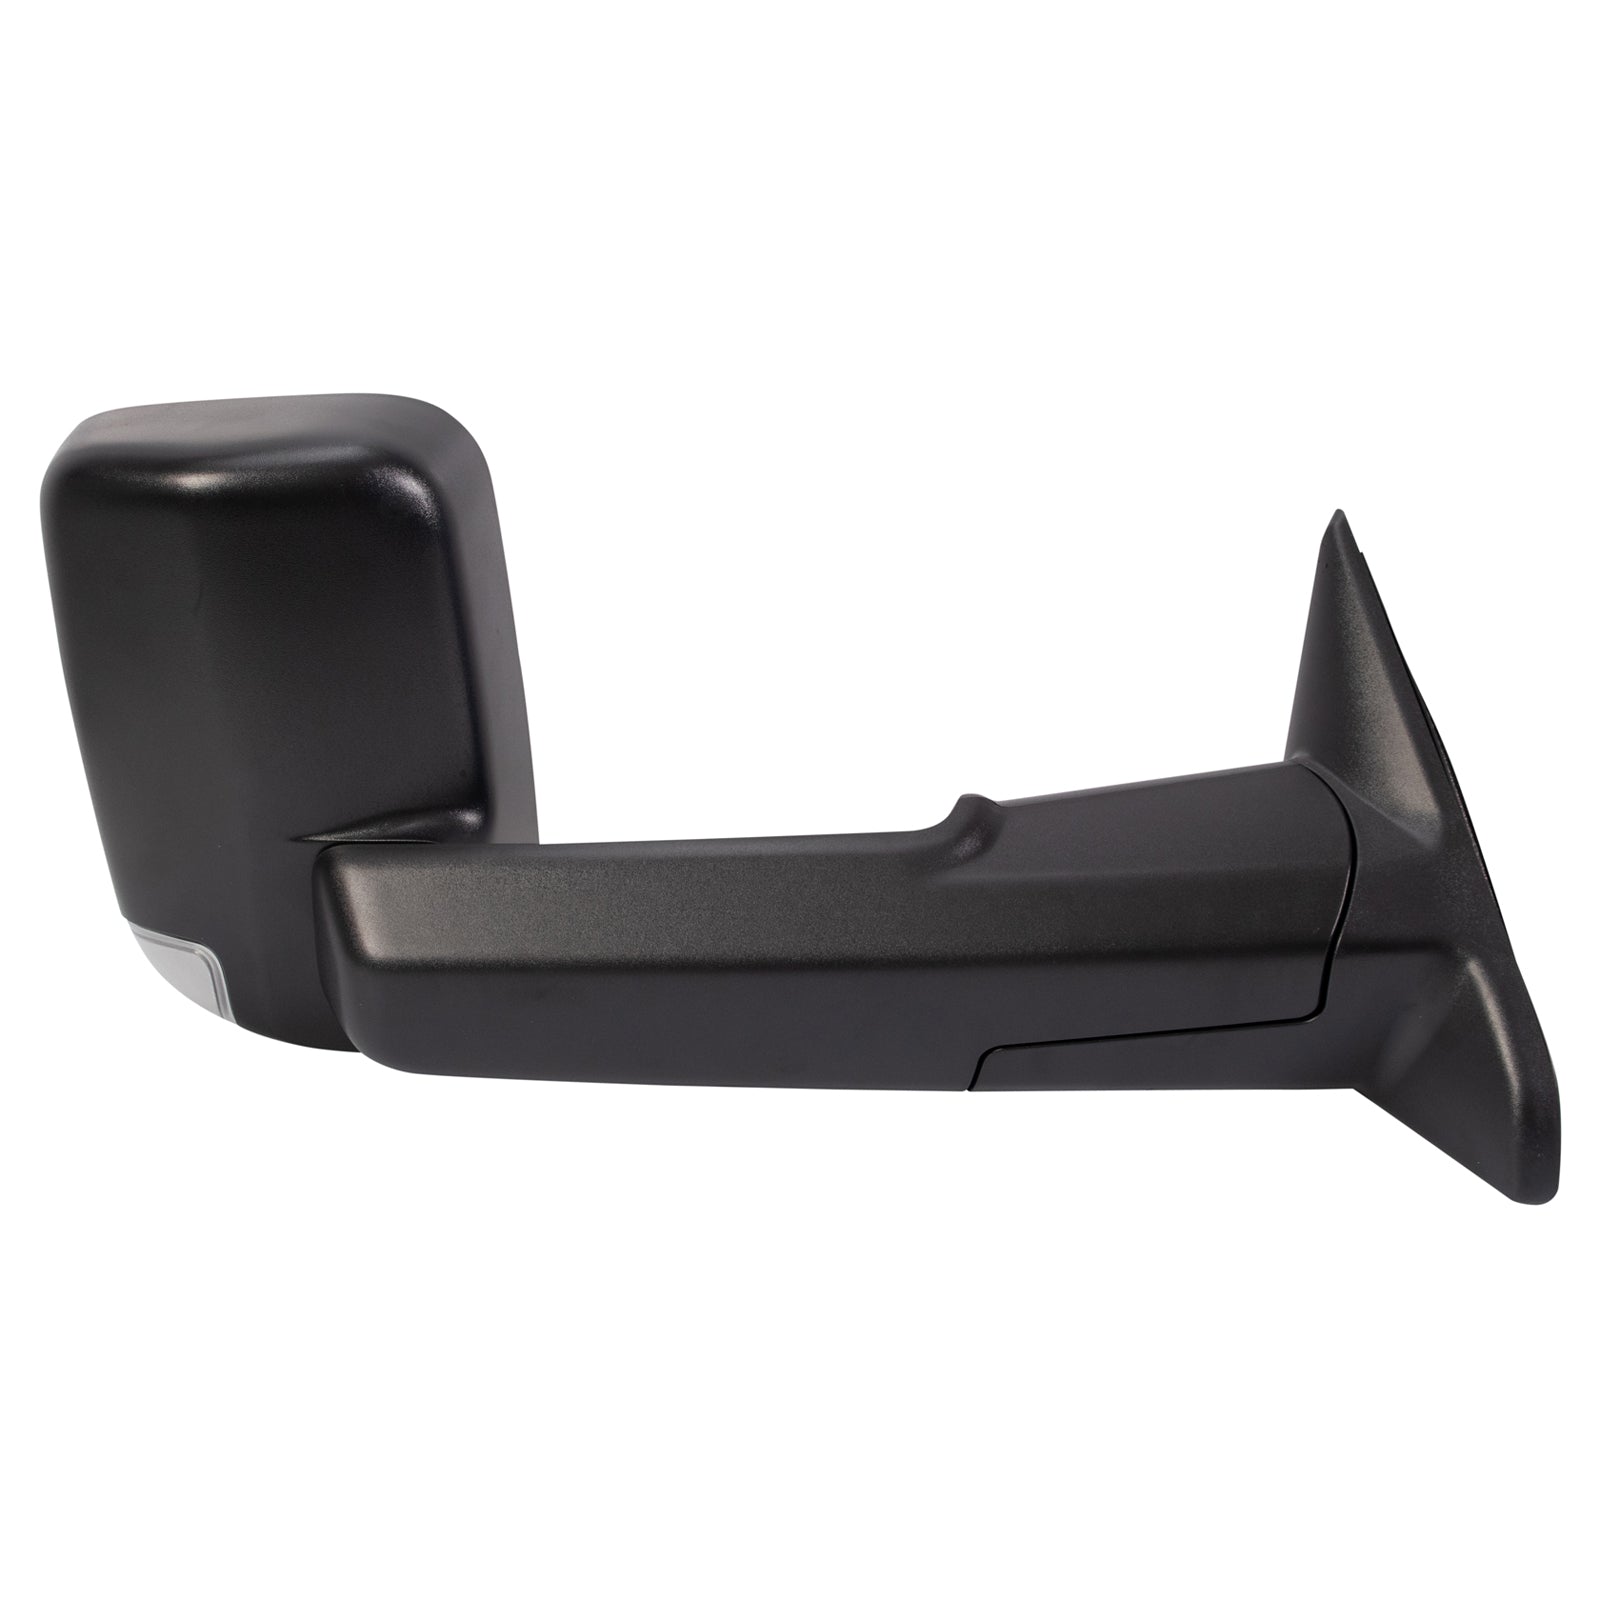 Autos Part Outlet? New Passenger Side Mirror Compatible with 2019-2021 Ram 3500 4500